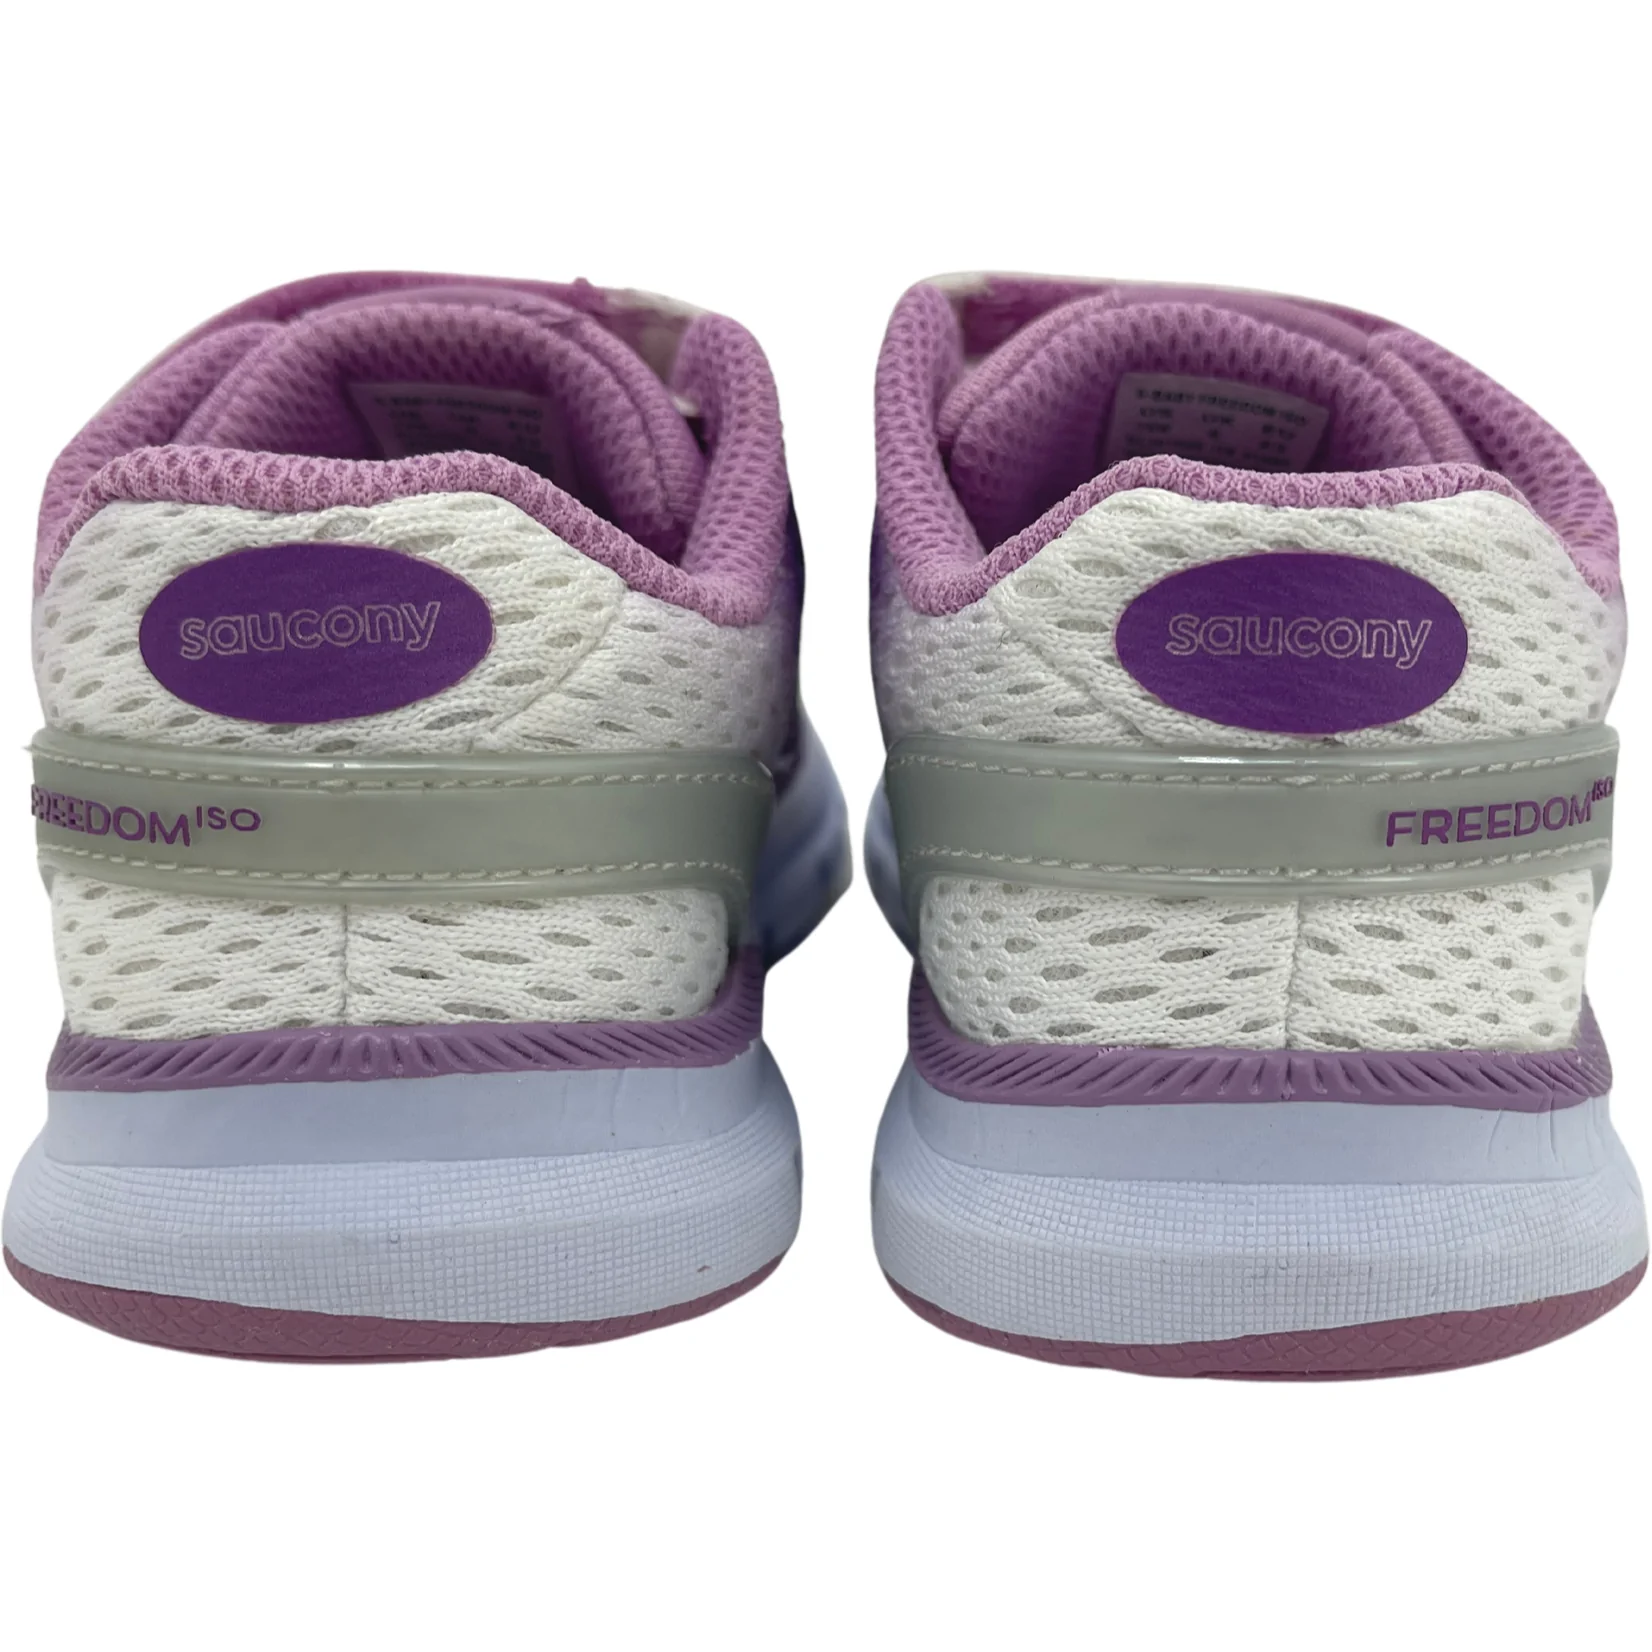 Saucony Girl's Running Shoes / S-Baby Freedom / Pink & Purple / Size 7XW **No Tags**